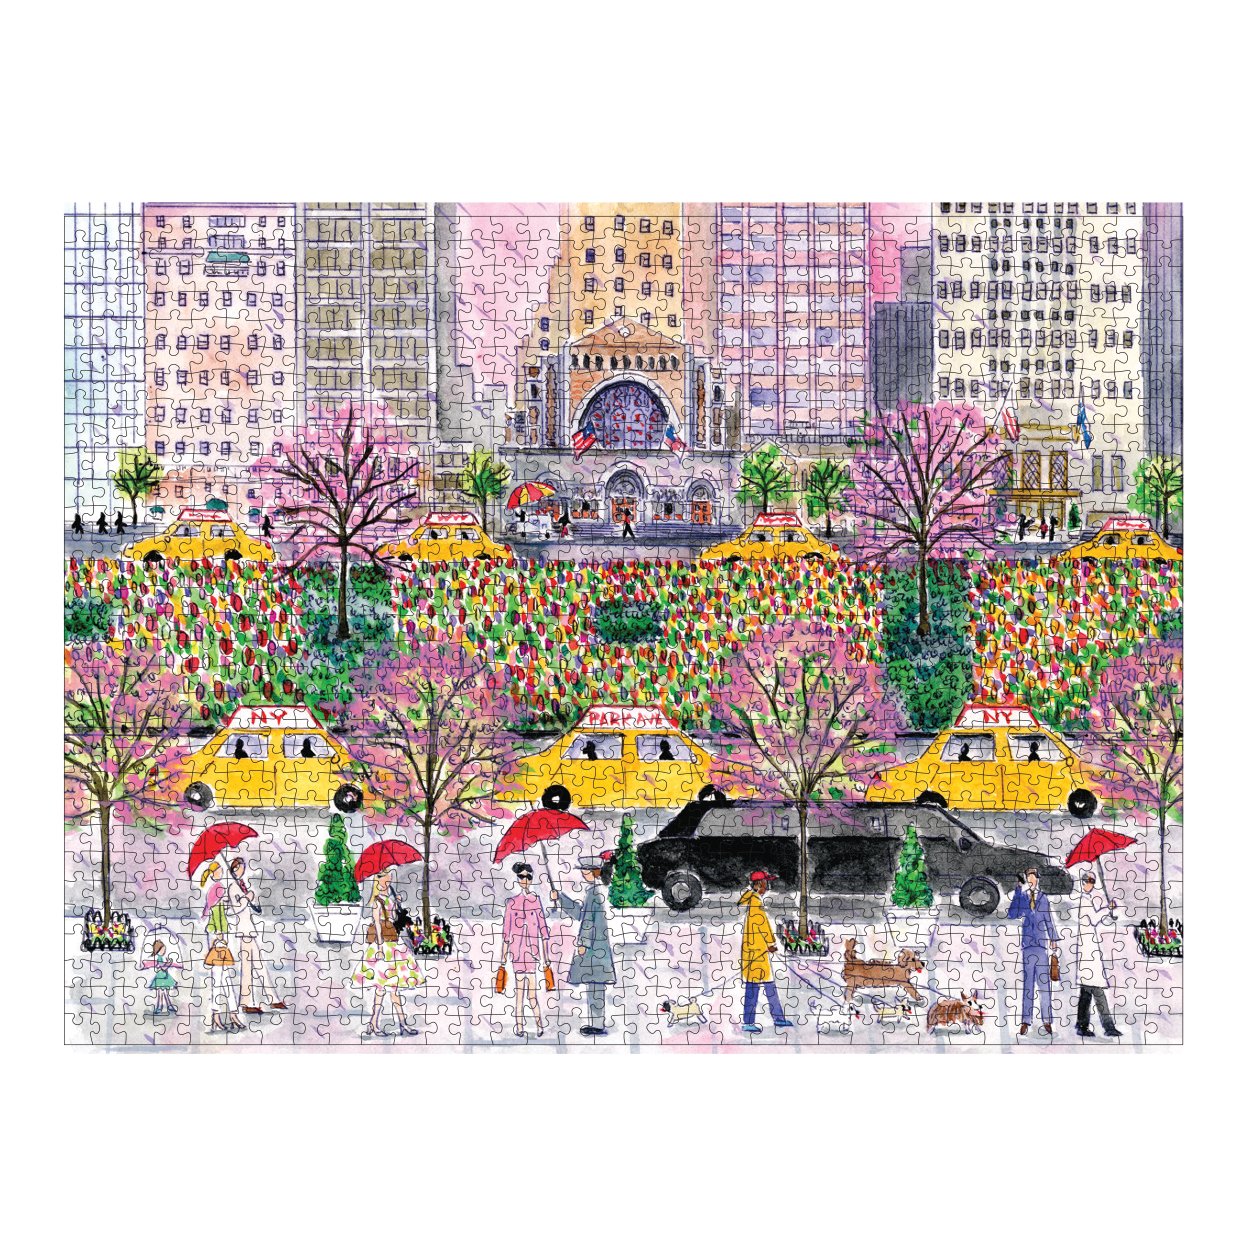 Galison Michael Storrings 1000 Piece Spring on Park Avenue New York City Jigsaw Puzzle for Adults, Vibrant Challenging Puzzle with NYC's famed Park Avenue Scene